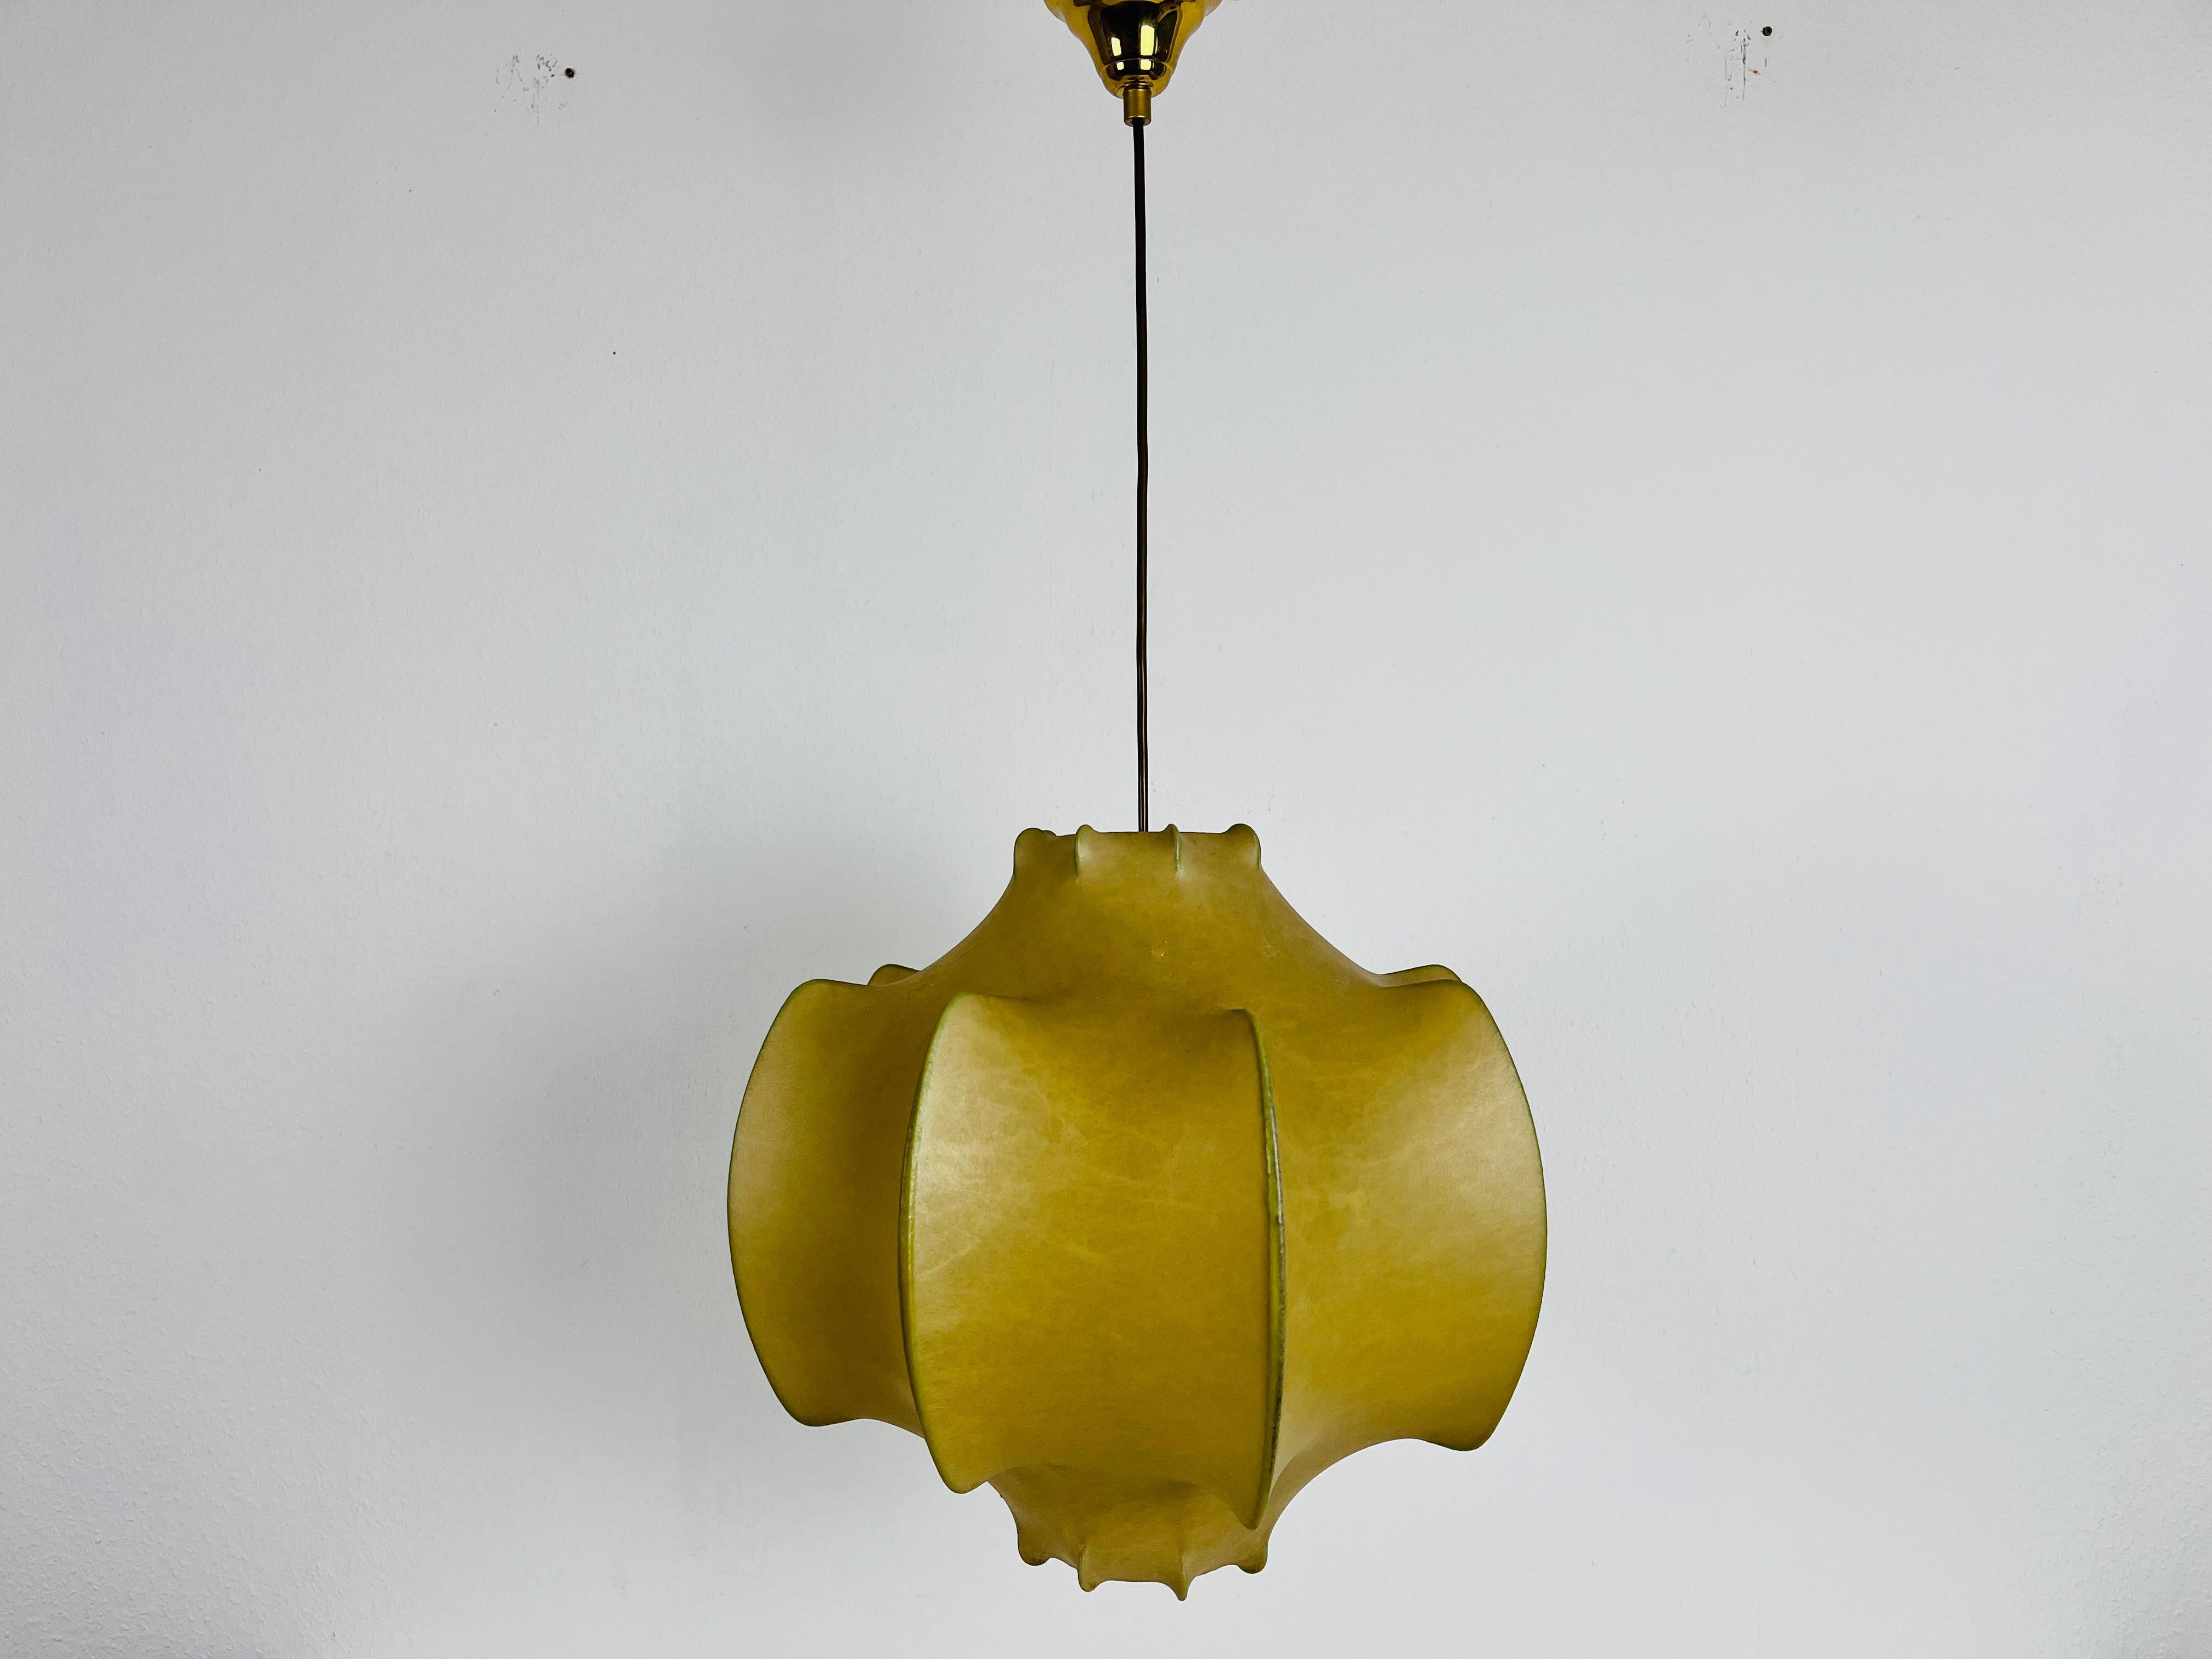 Large Viscontea pendant lamp made in Italy in the 1960s. The hanging lamp has been designed by Achille and Pier Giacomo Castiglioni for Flos. The lamp shade is made of original resin.

Measures: 

Height of shade 40 cm
Total height up to 85